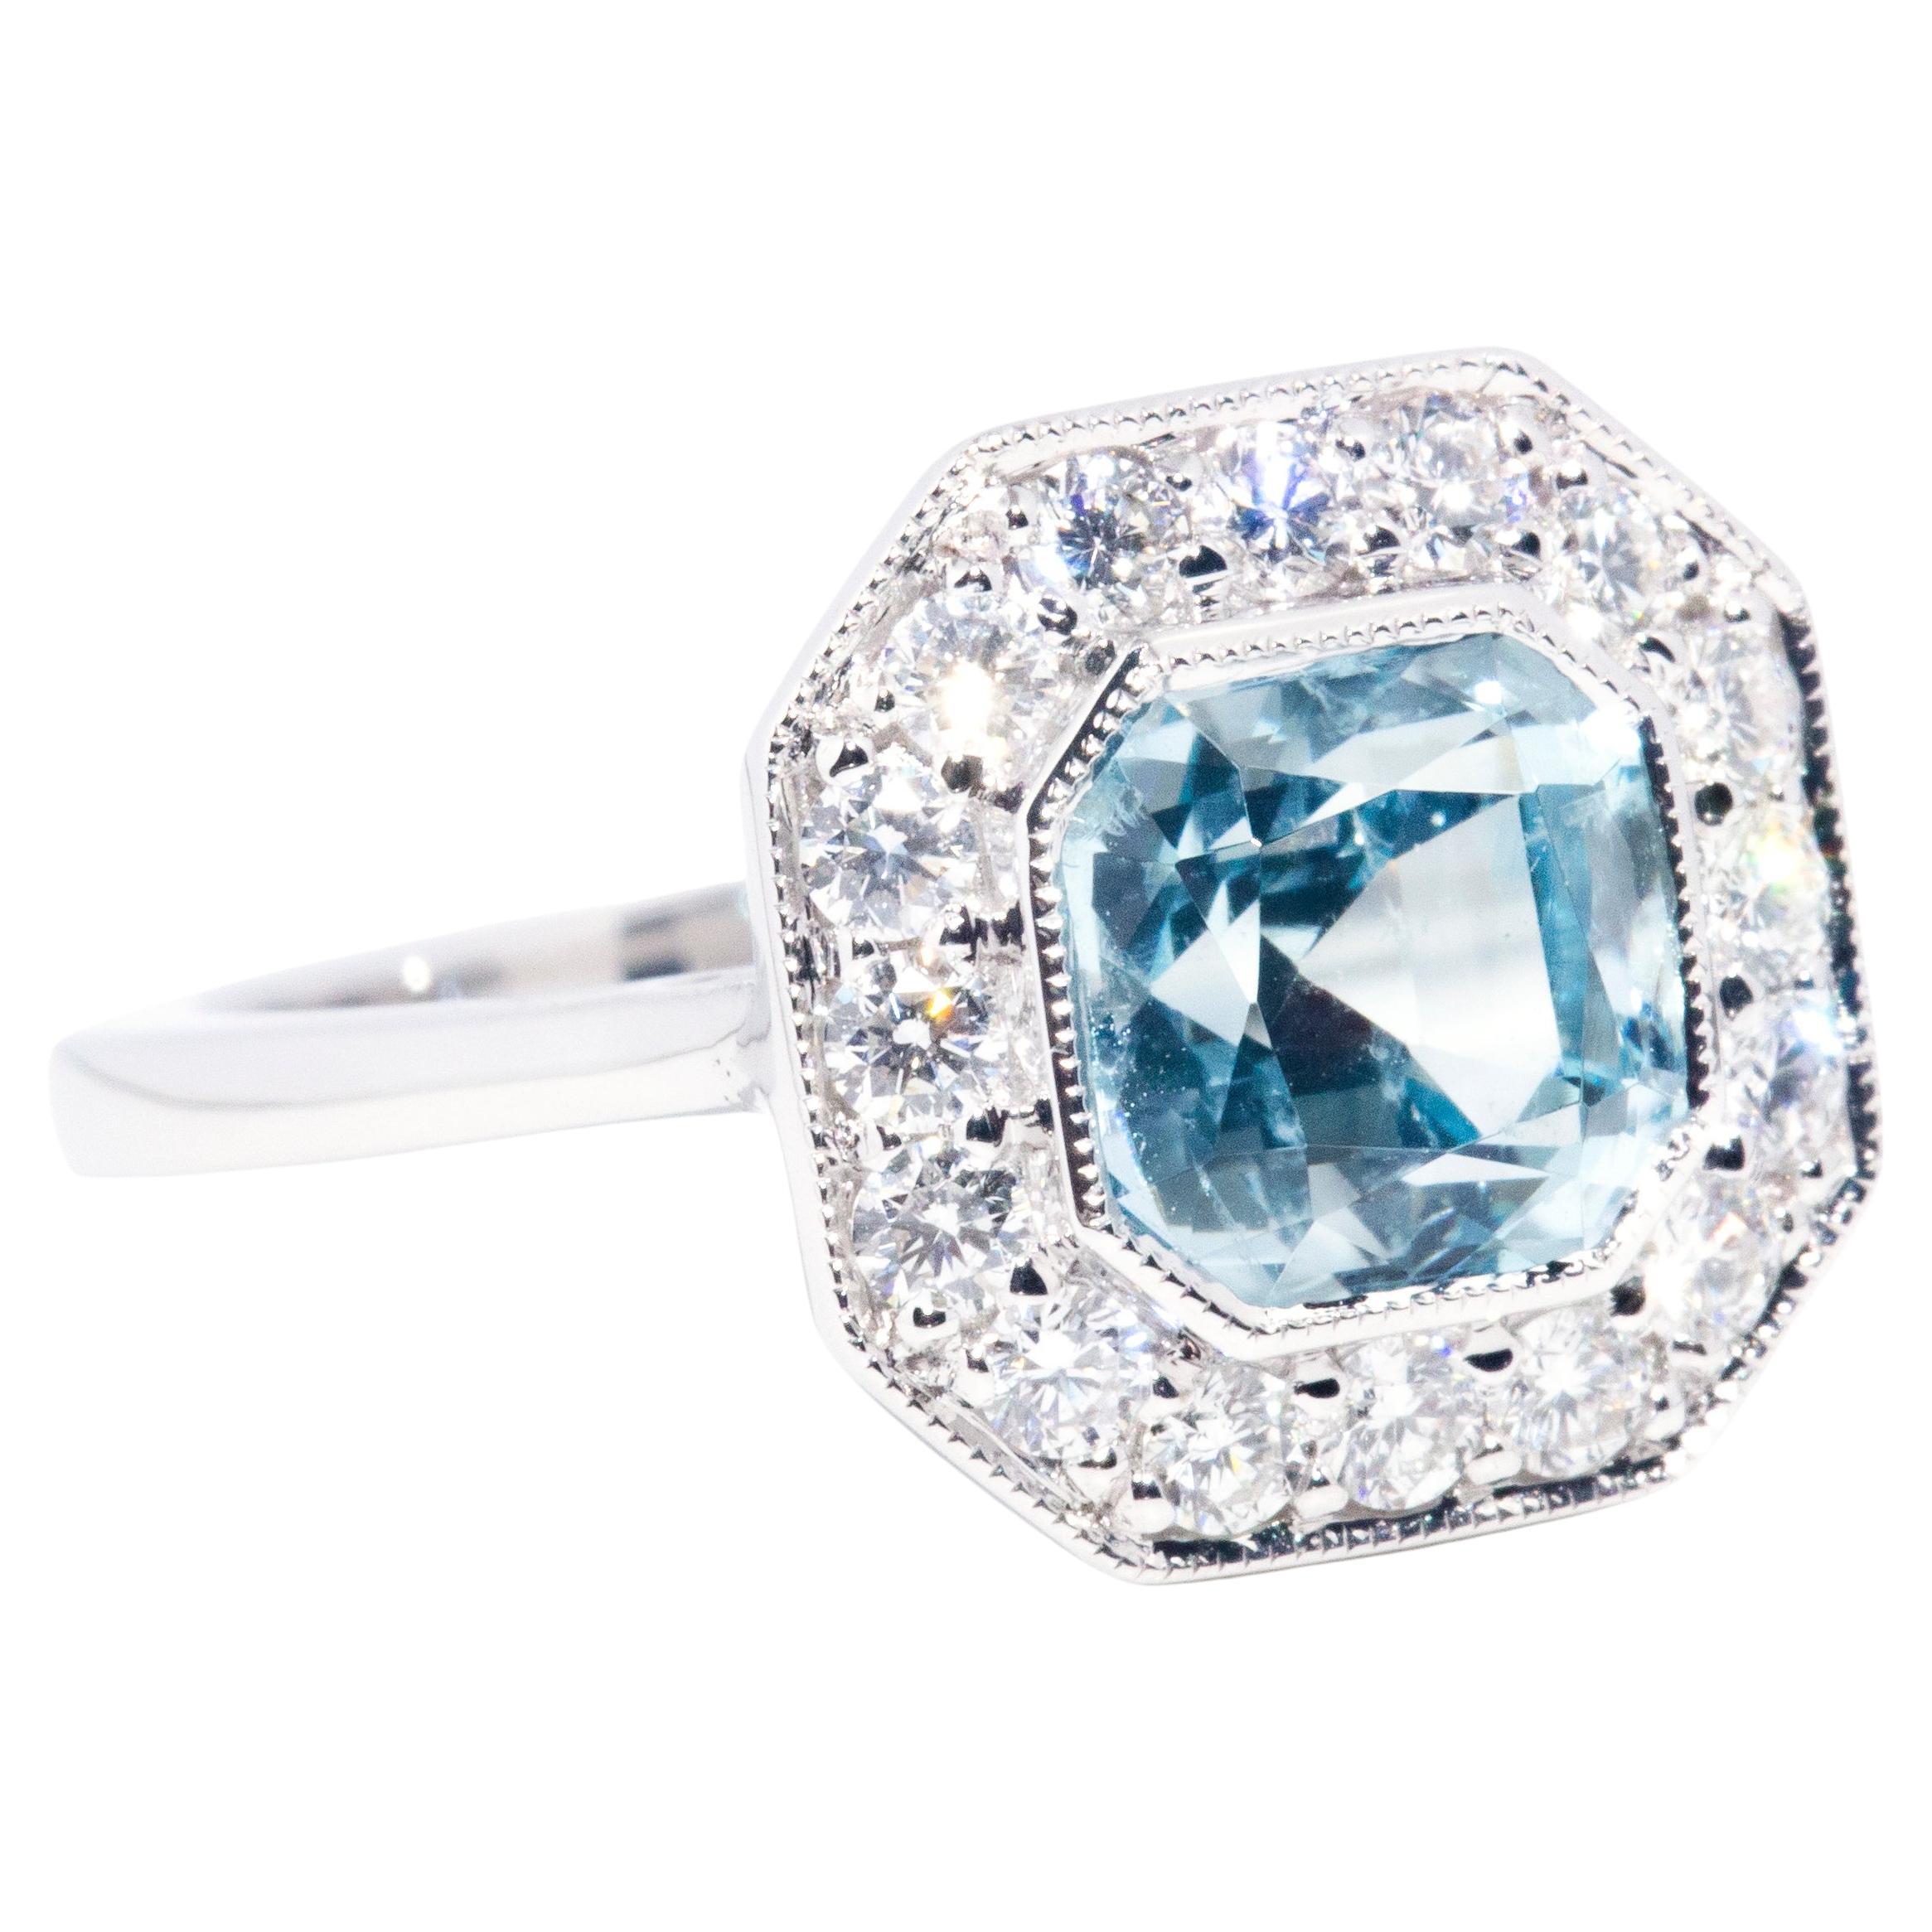 Forged in 18 carat white gold, this captivating halo ring features a breathtaking 2.04 carat bright light blue Asscher cut aquamarine resting in a captivating halo gallery and encompassed by a shimmering border of round brilliant cut diamonds. This